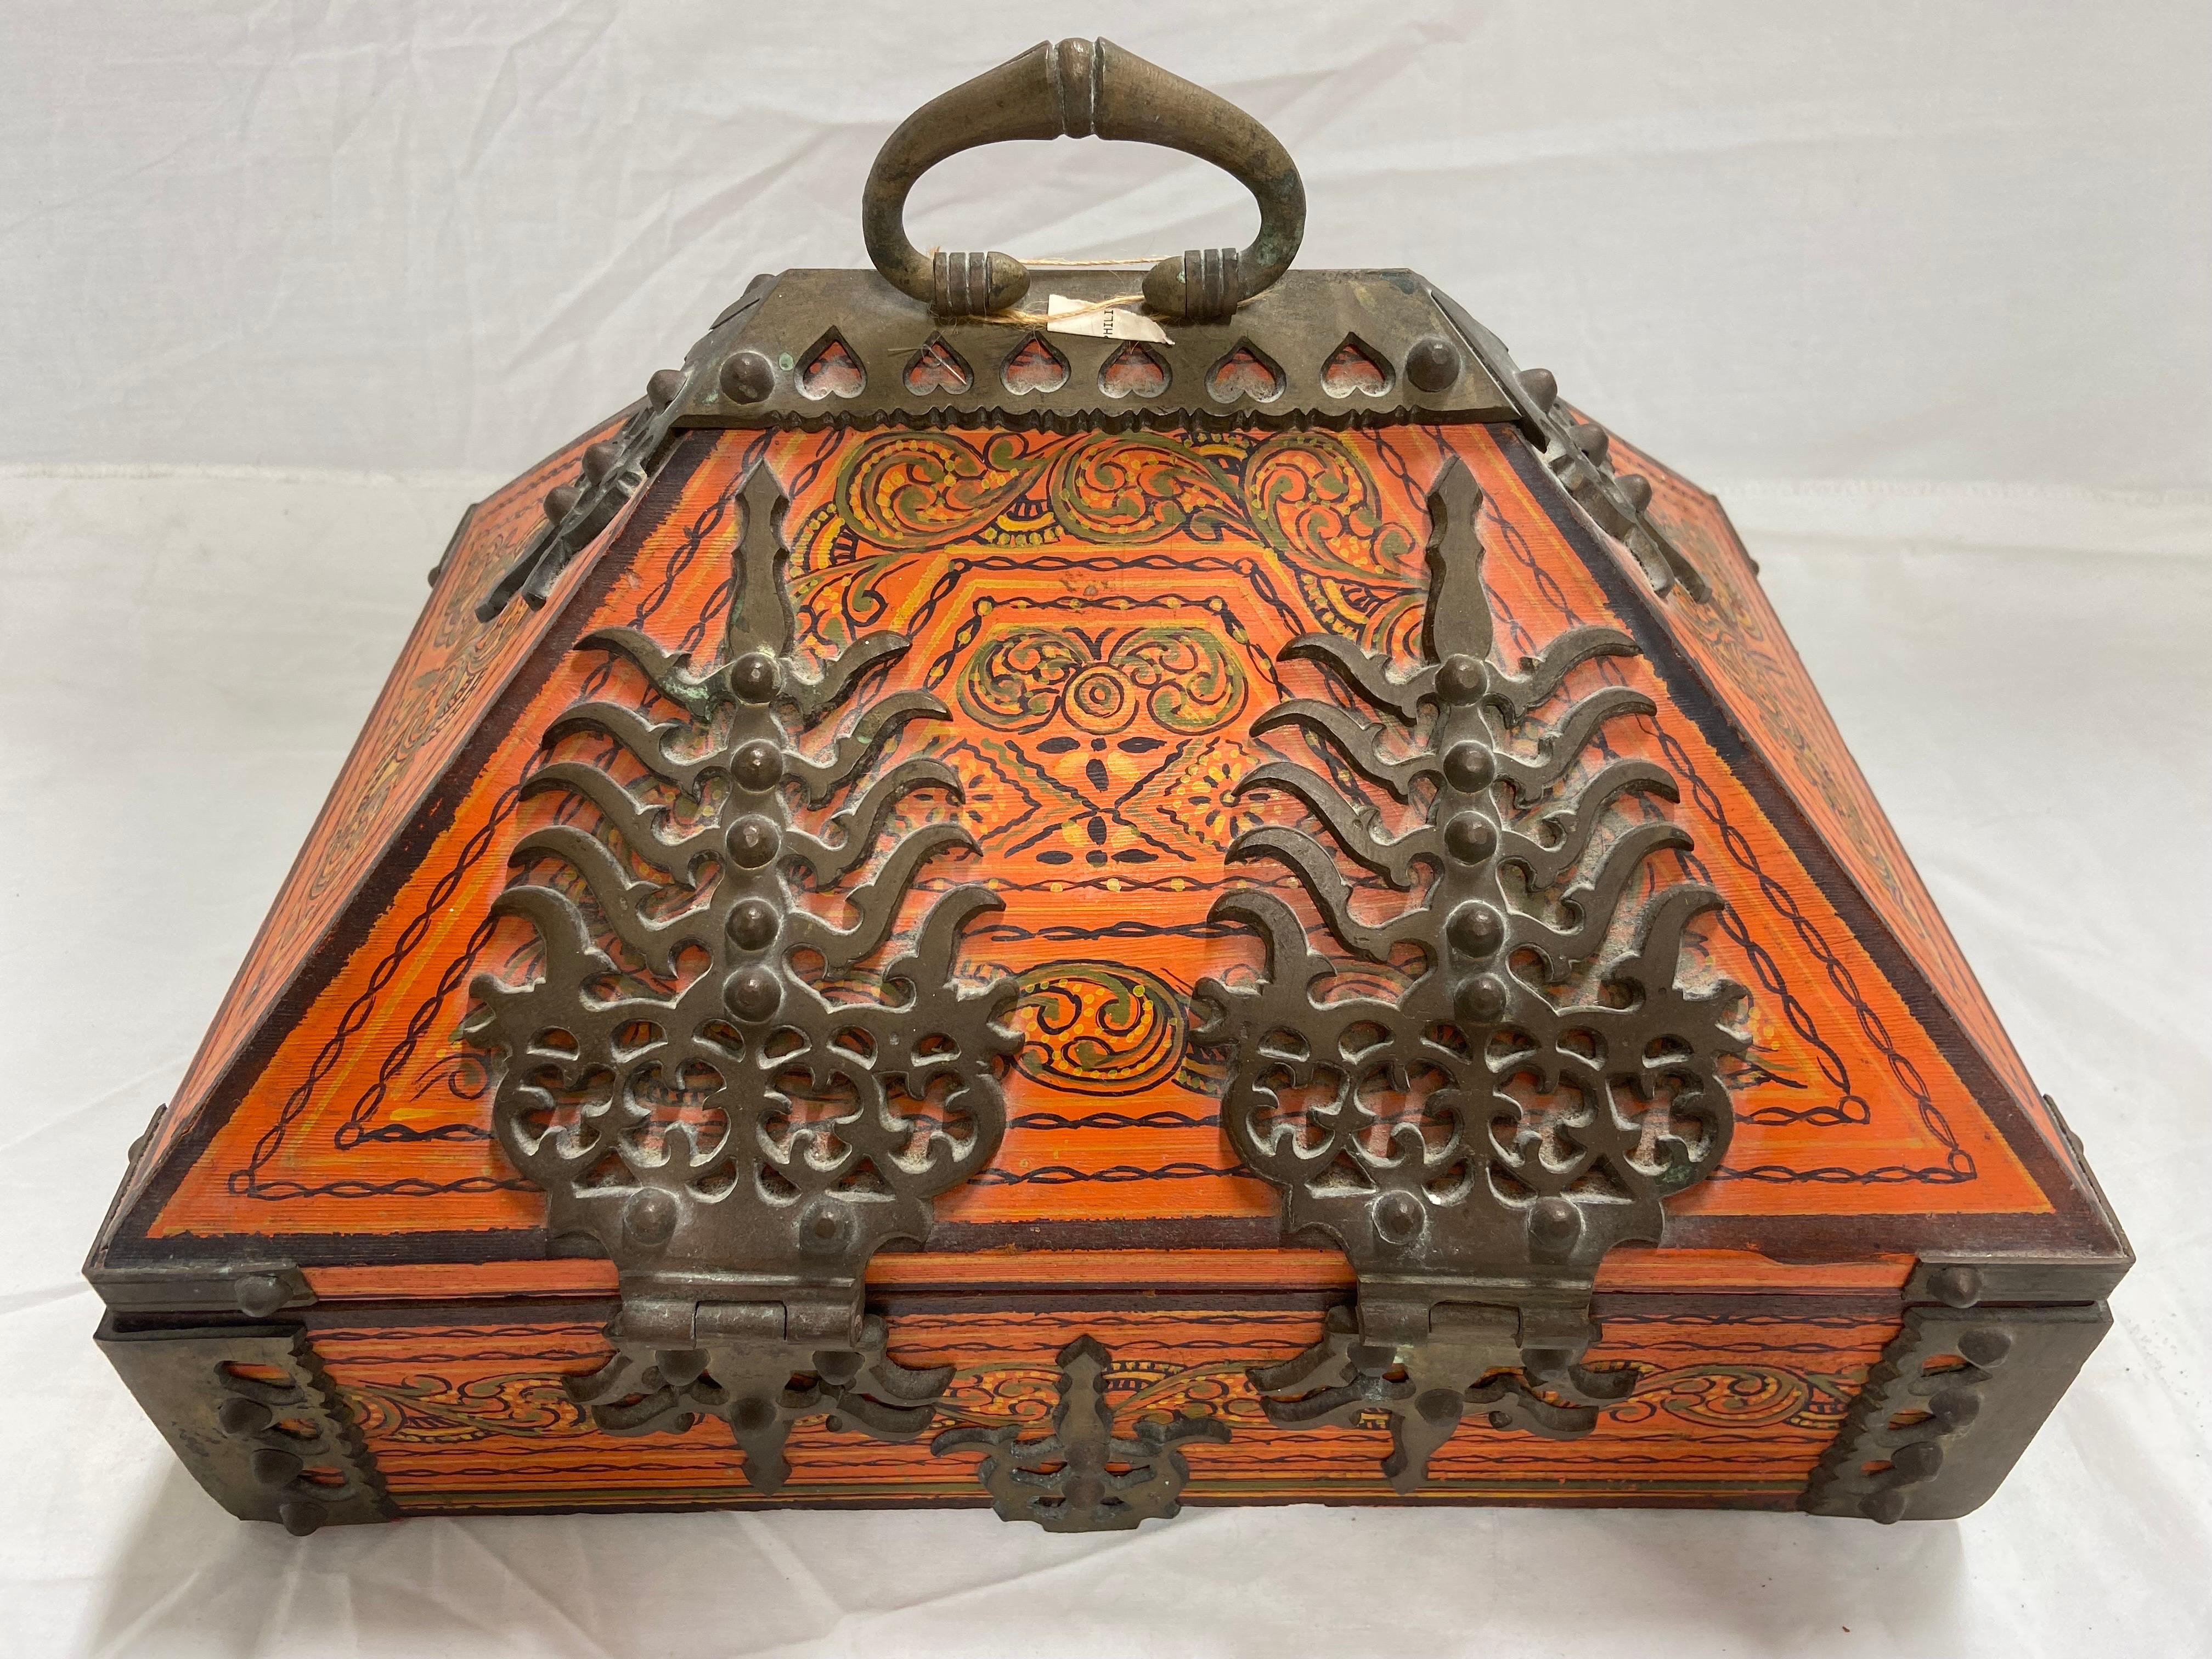 20th Century Vintage Large Indian Dowry Box with Ornate Brass Hinges and Paint Decoration